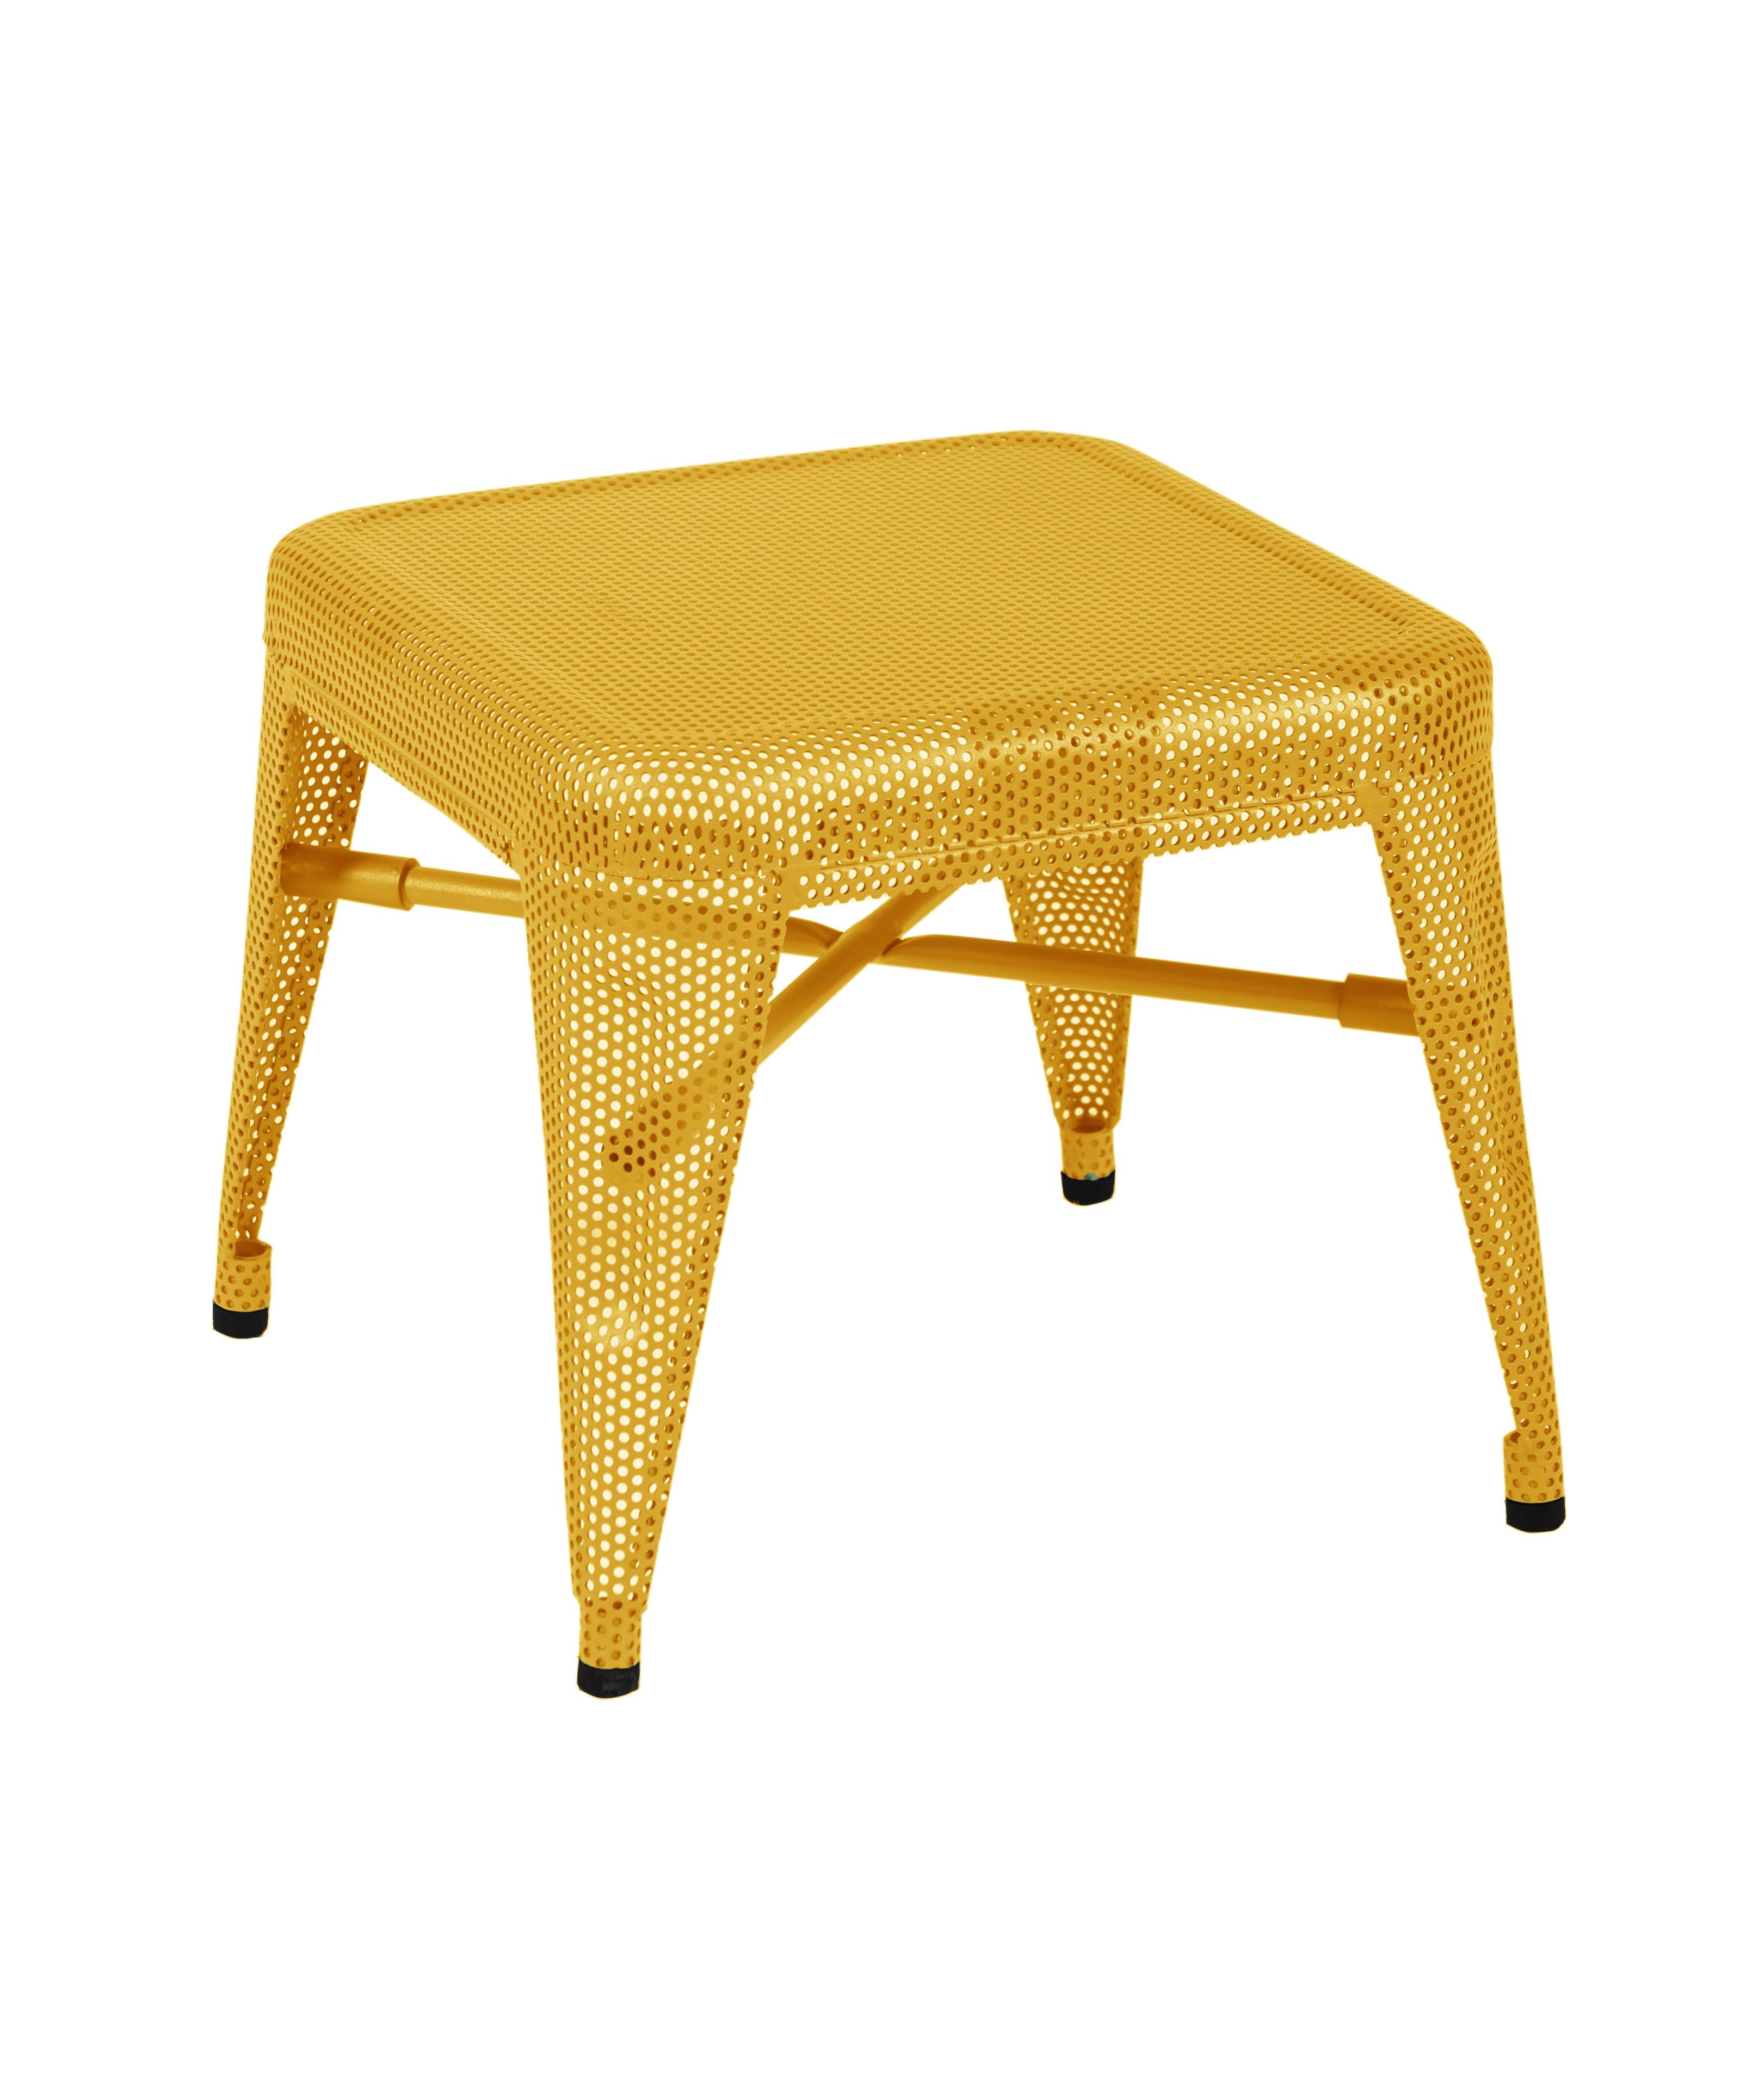 For Sale: Orange (Jaune Moutarde) H30 Indoor Perforated Steel Stool in Pop Colors by Tolix